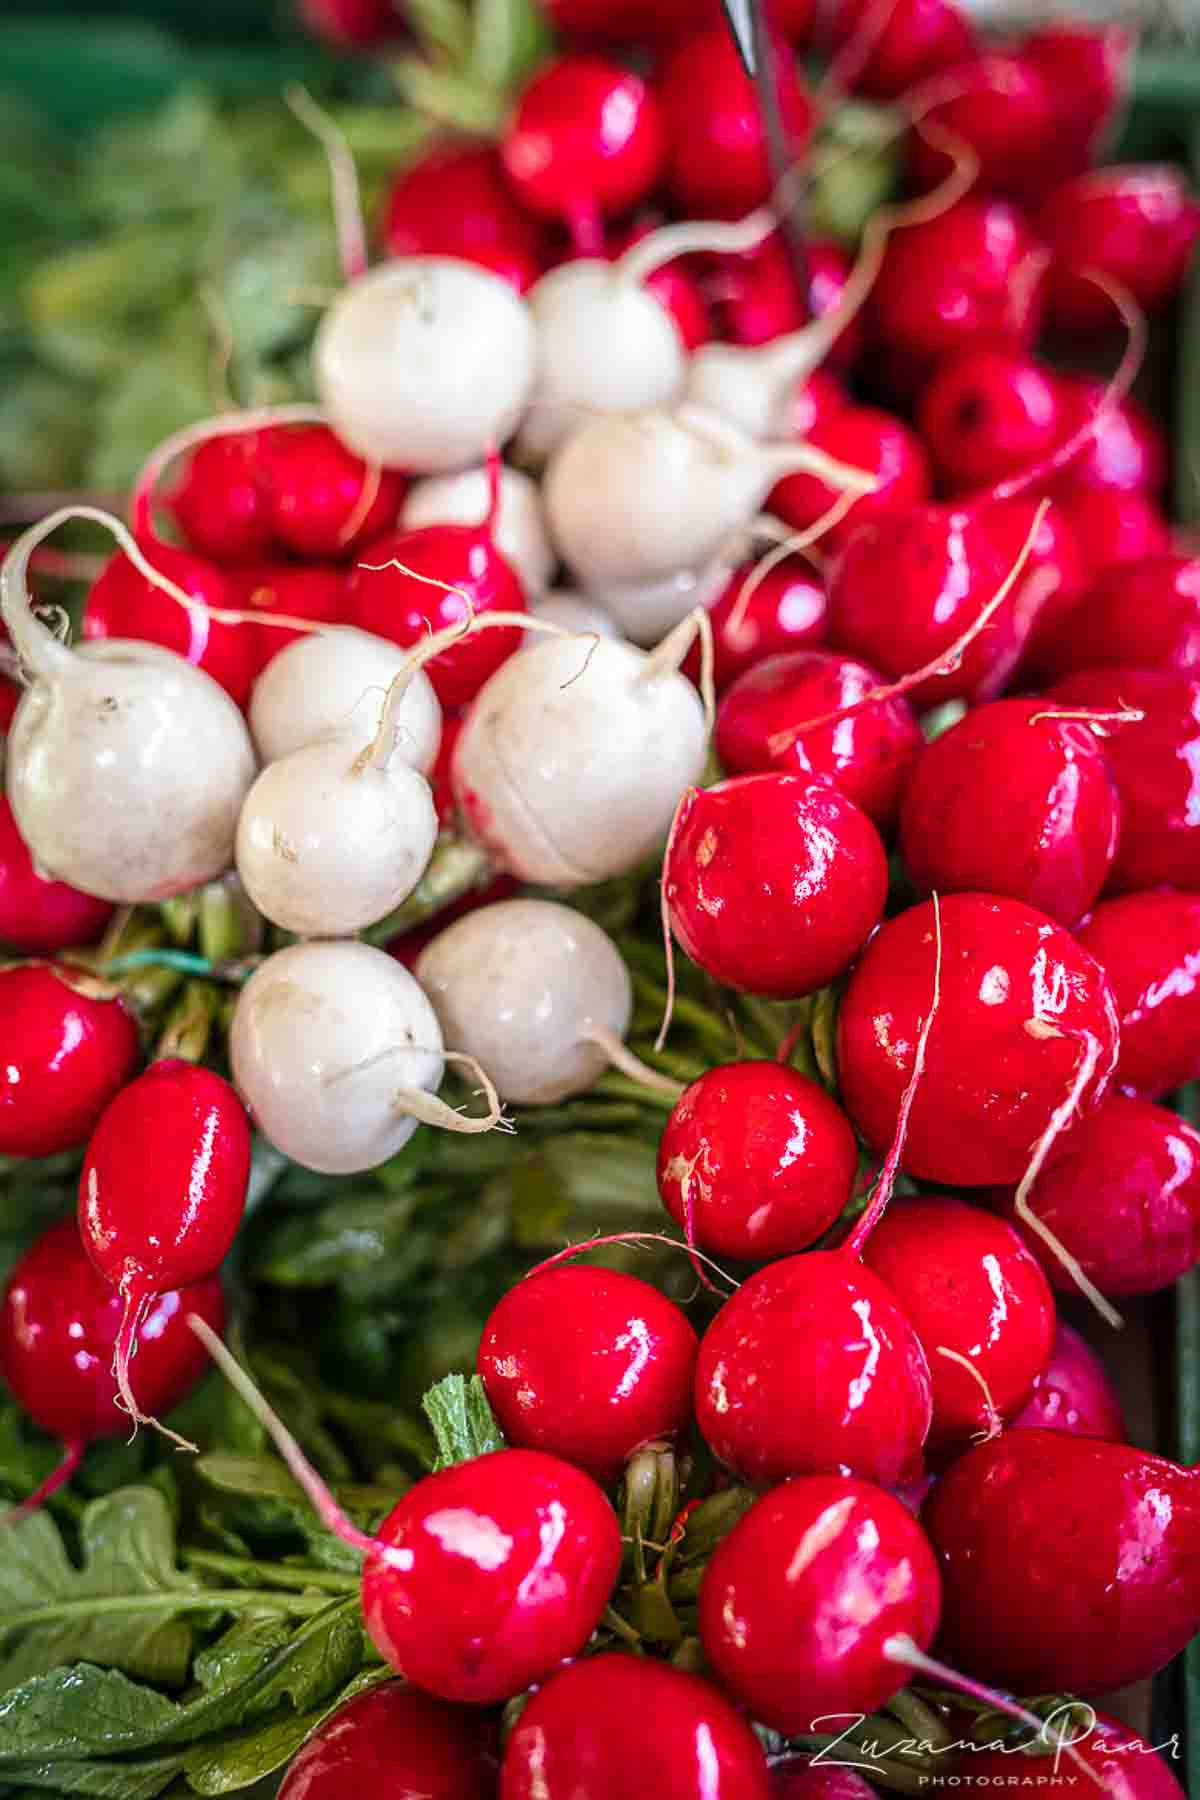 Red radishes and white radishes on display at a market.